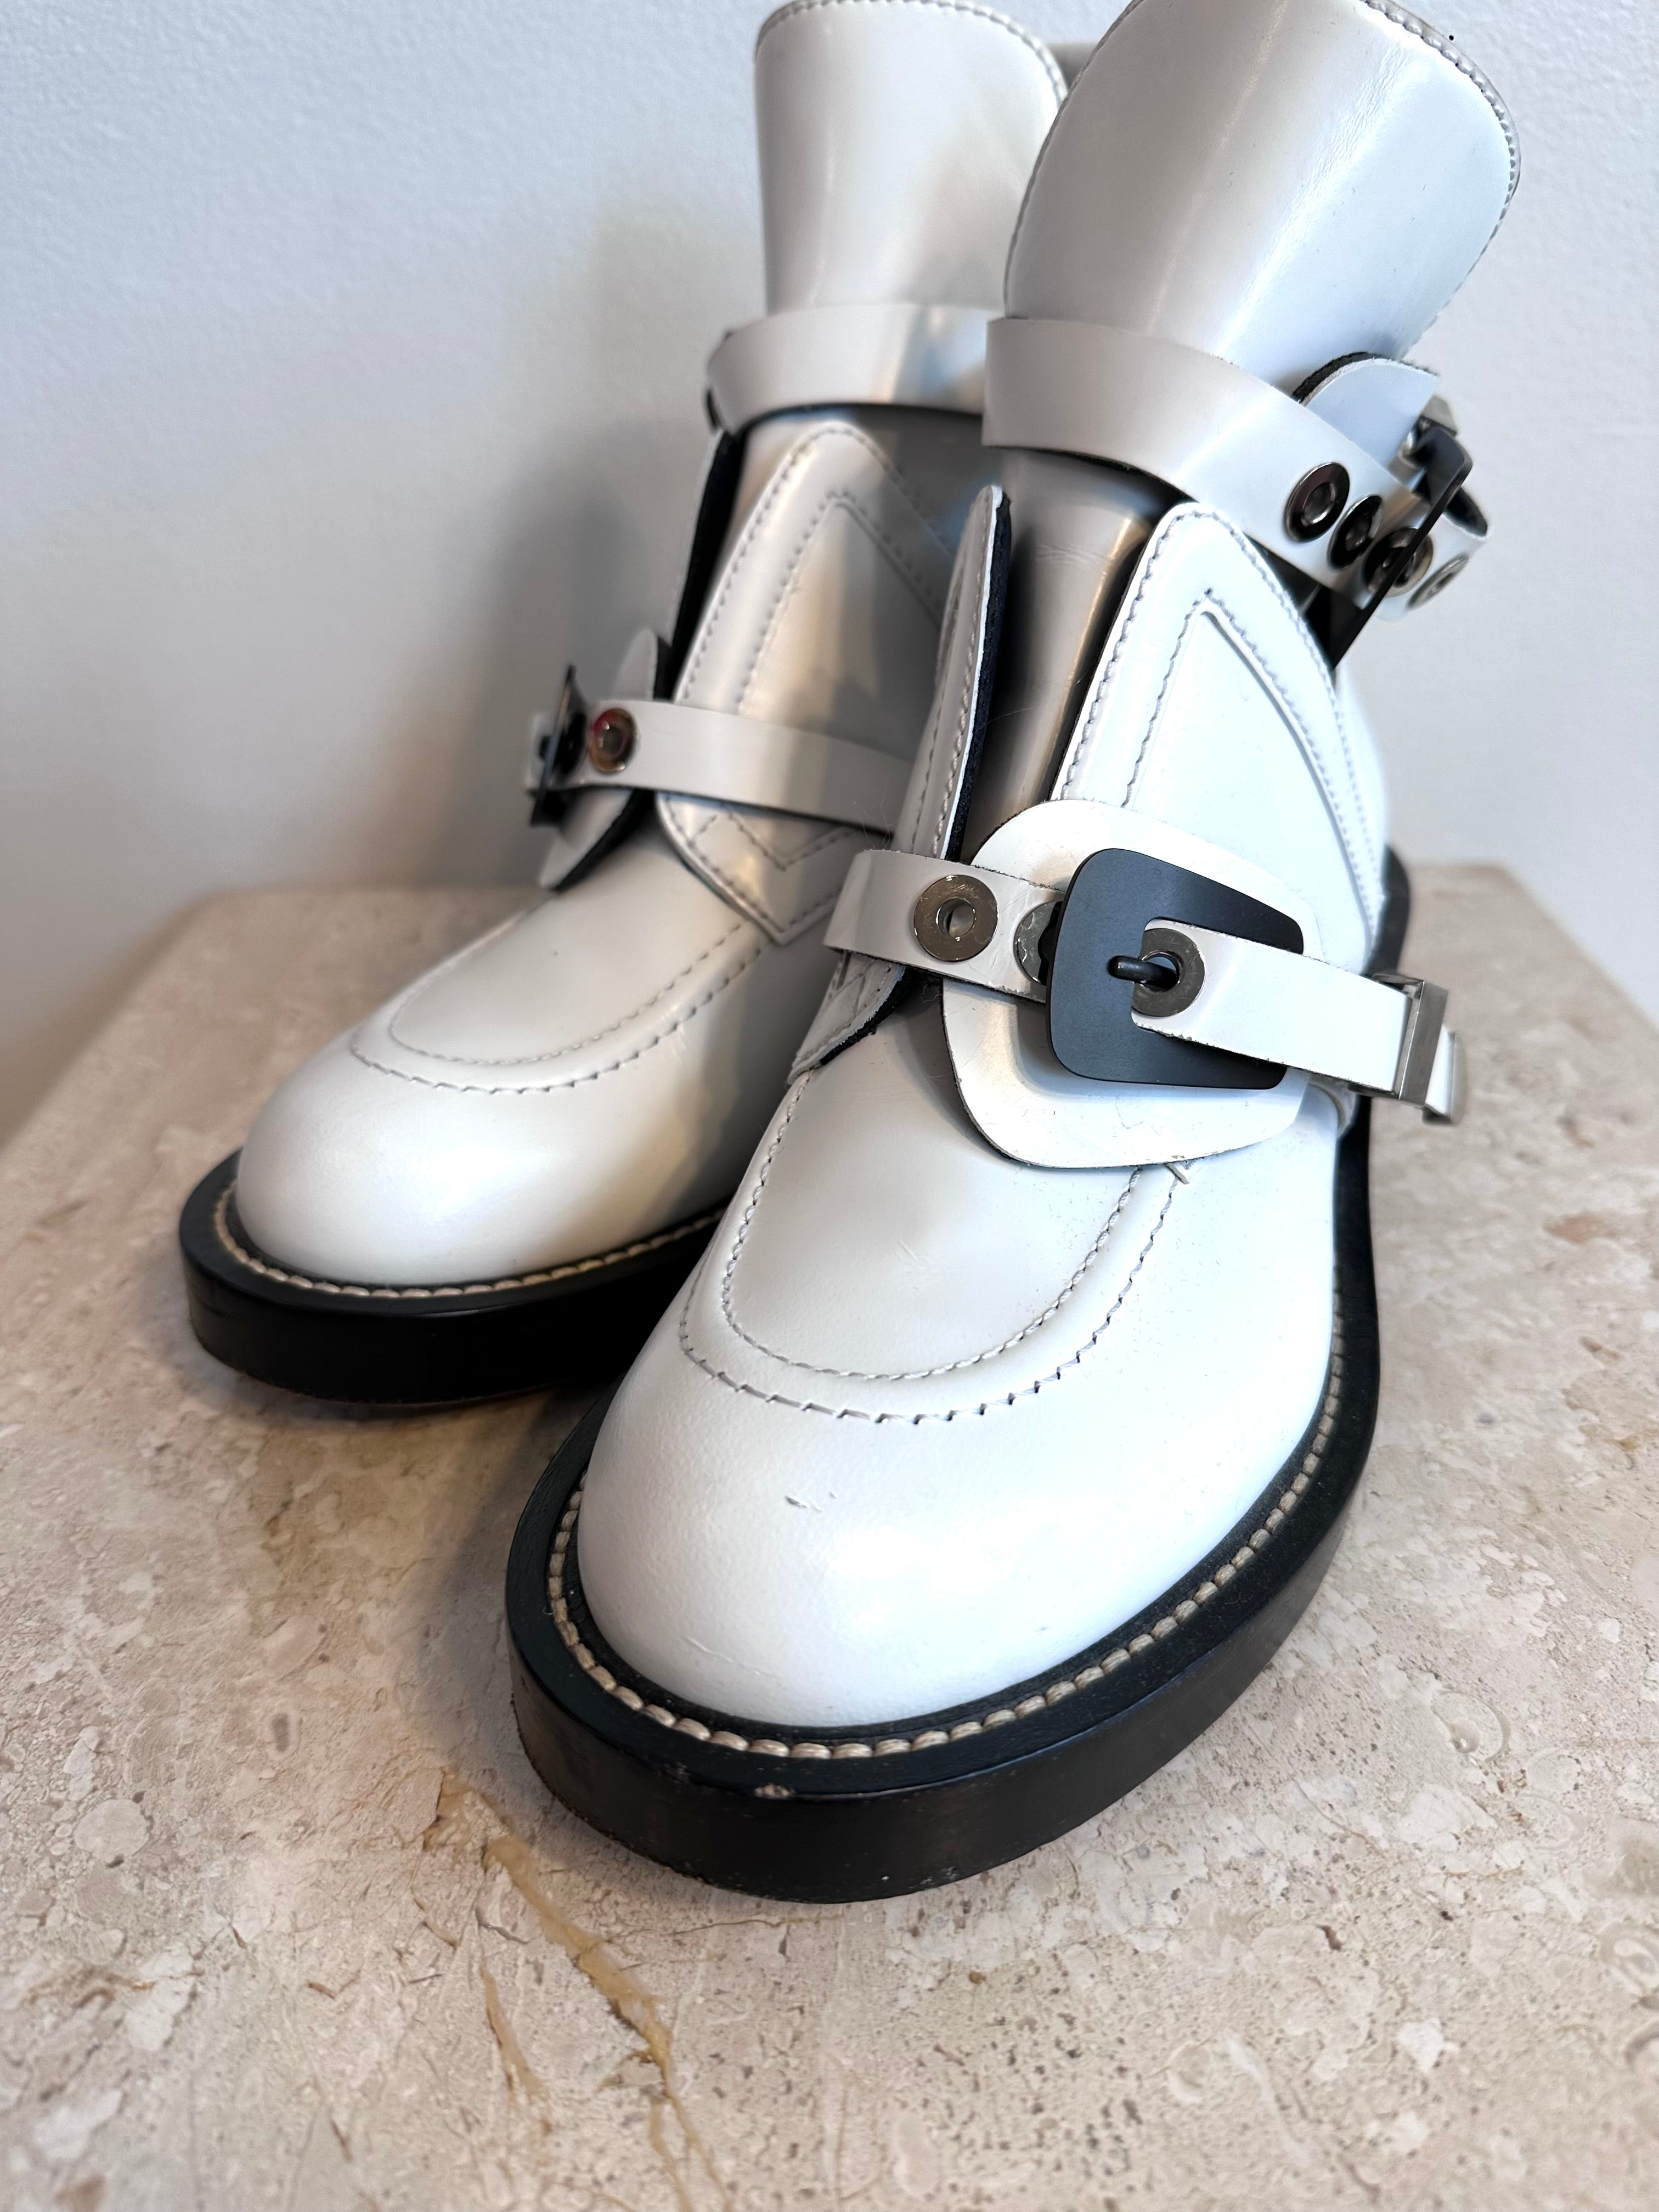 Pre-Owned BALENCIAGA White Leather Booties - Size 39